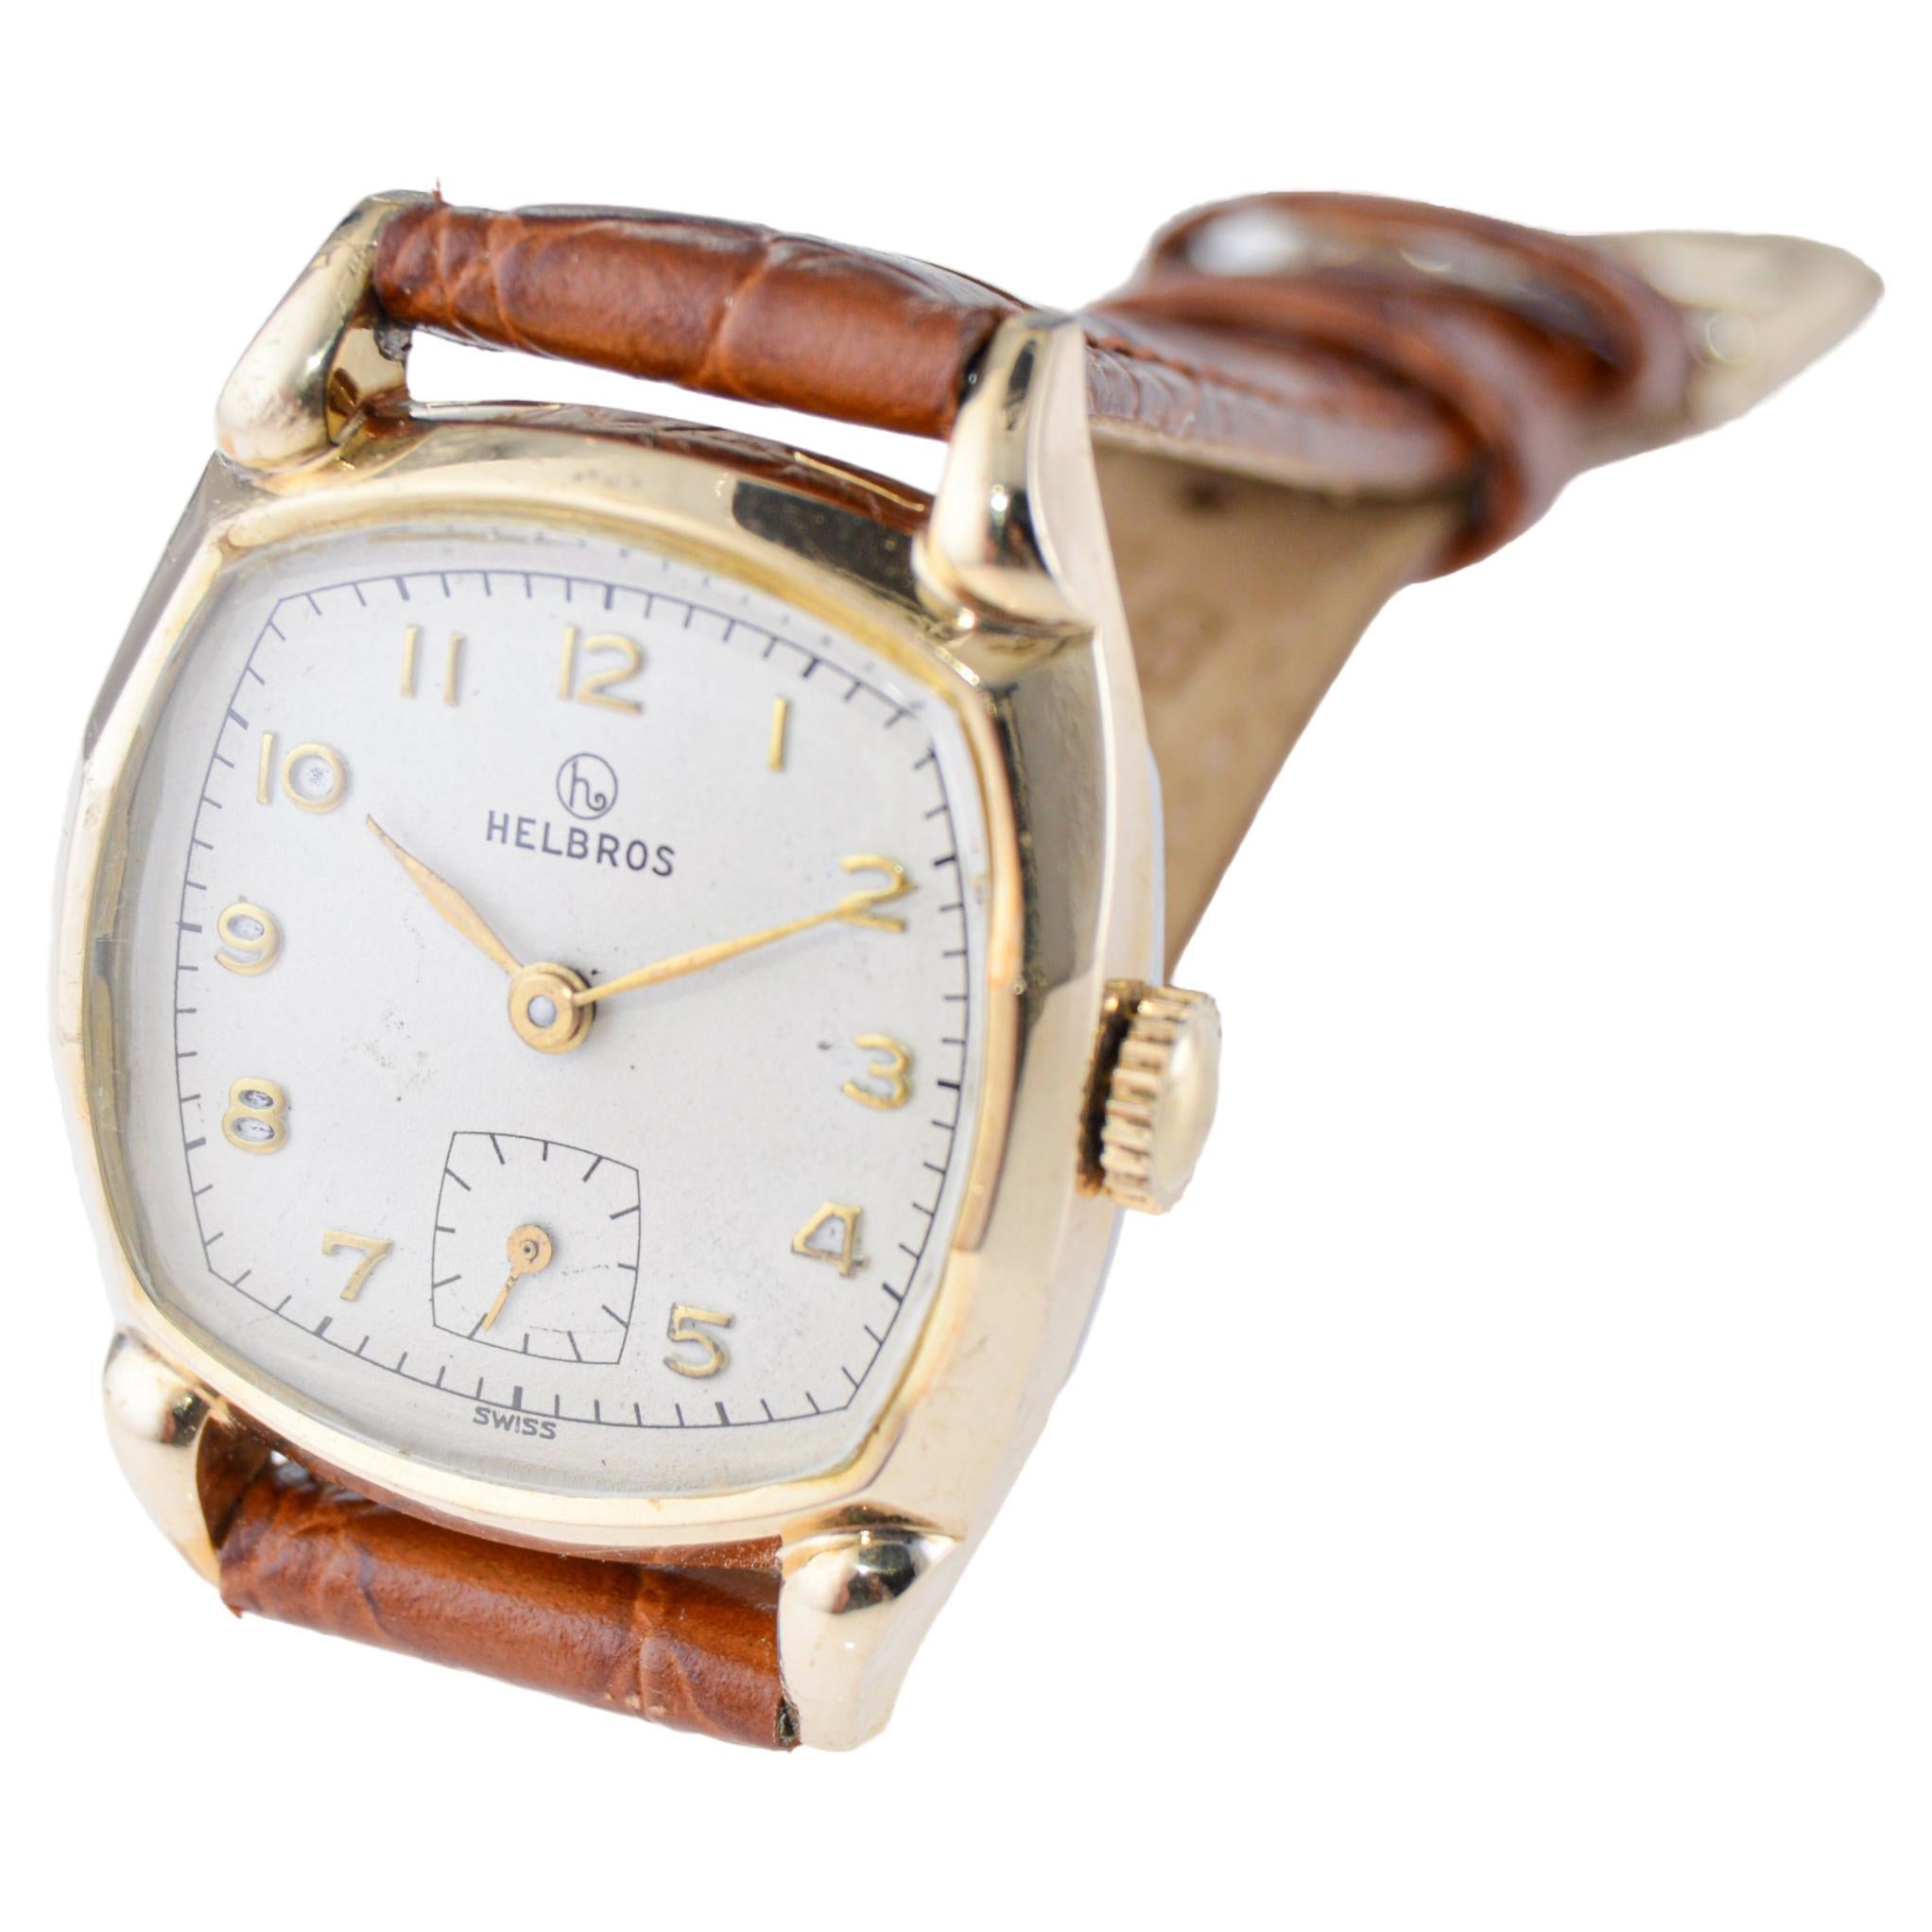 Art Deco Helbros Yellow Gold Filled Cushion Shaped Watch from 1940s with Original Dial For Sale